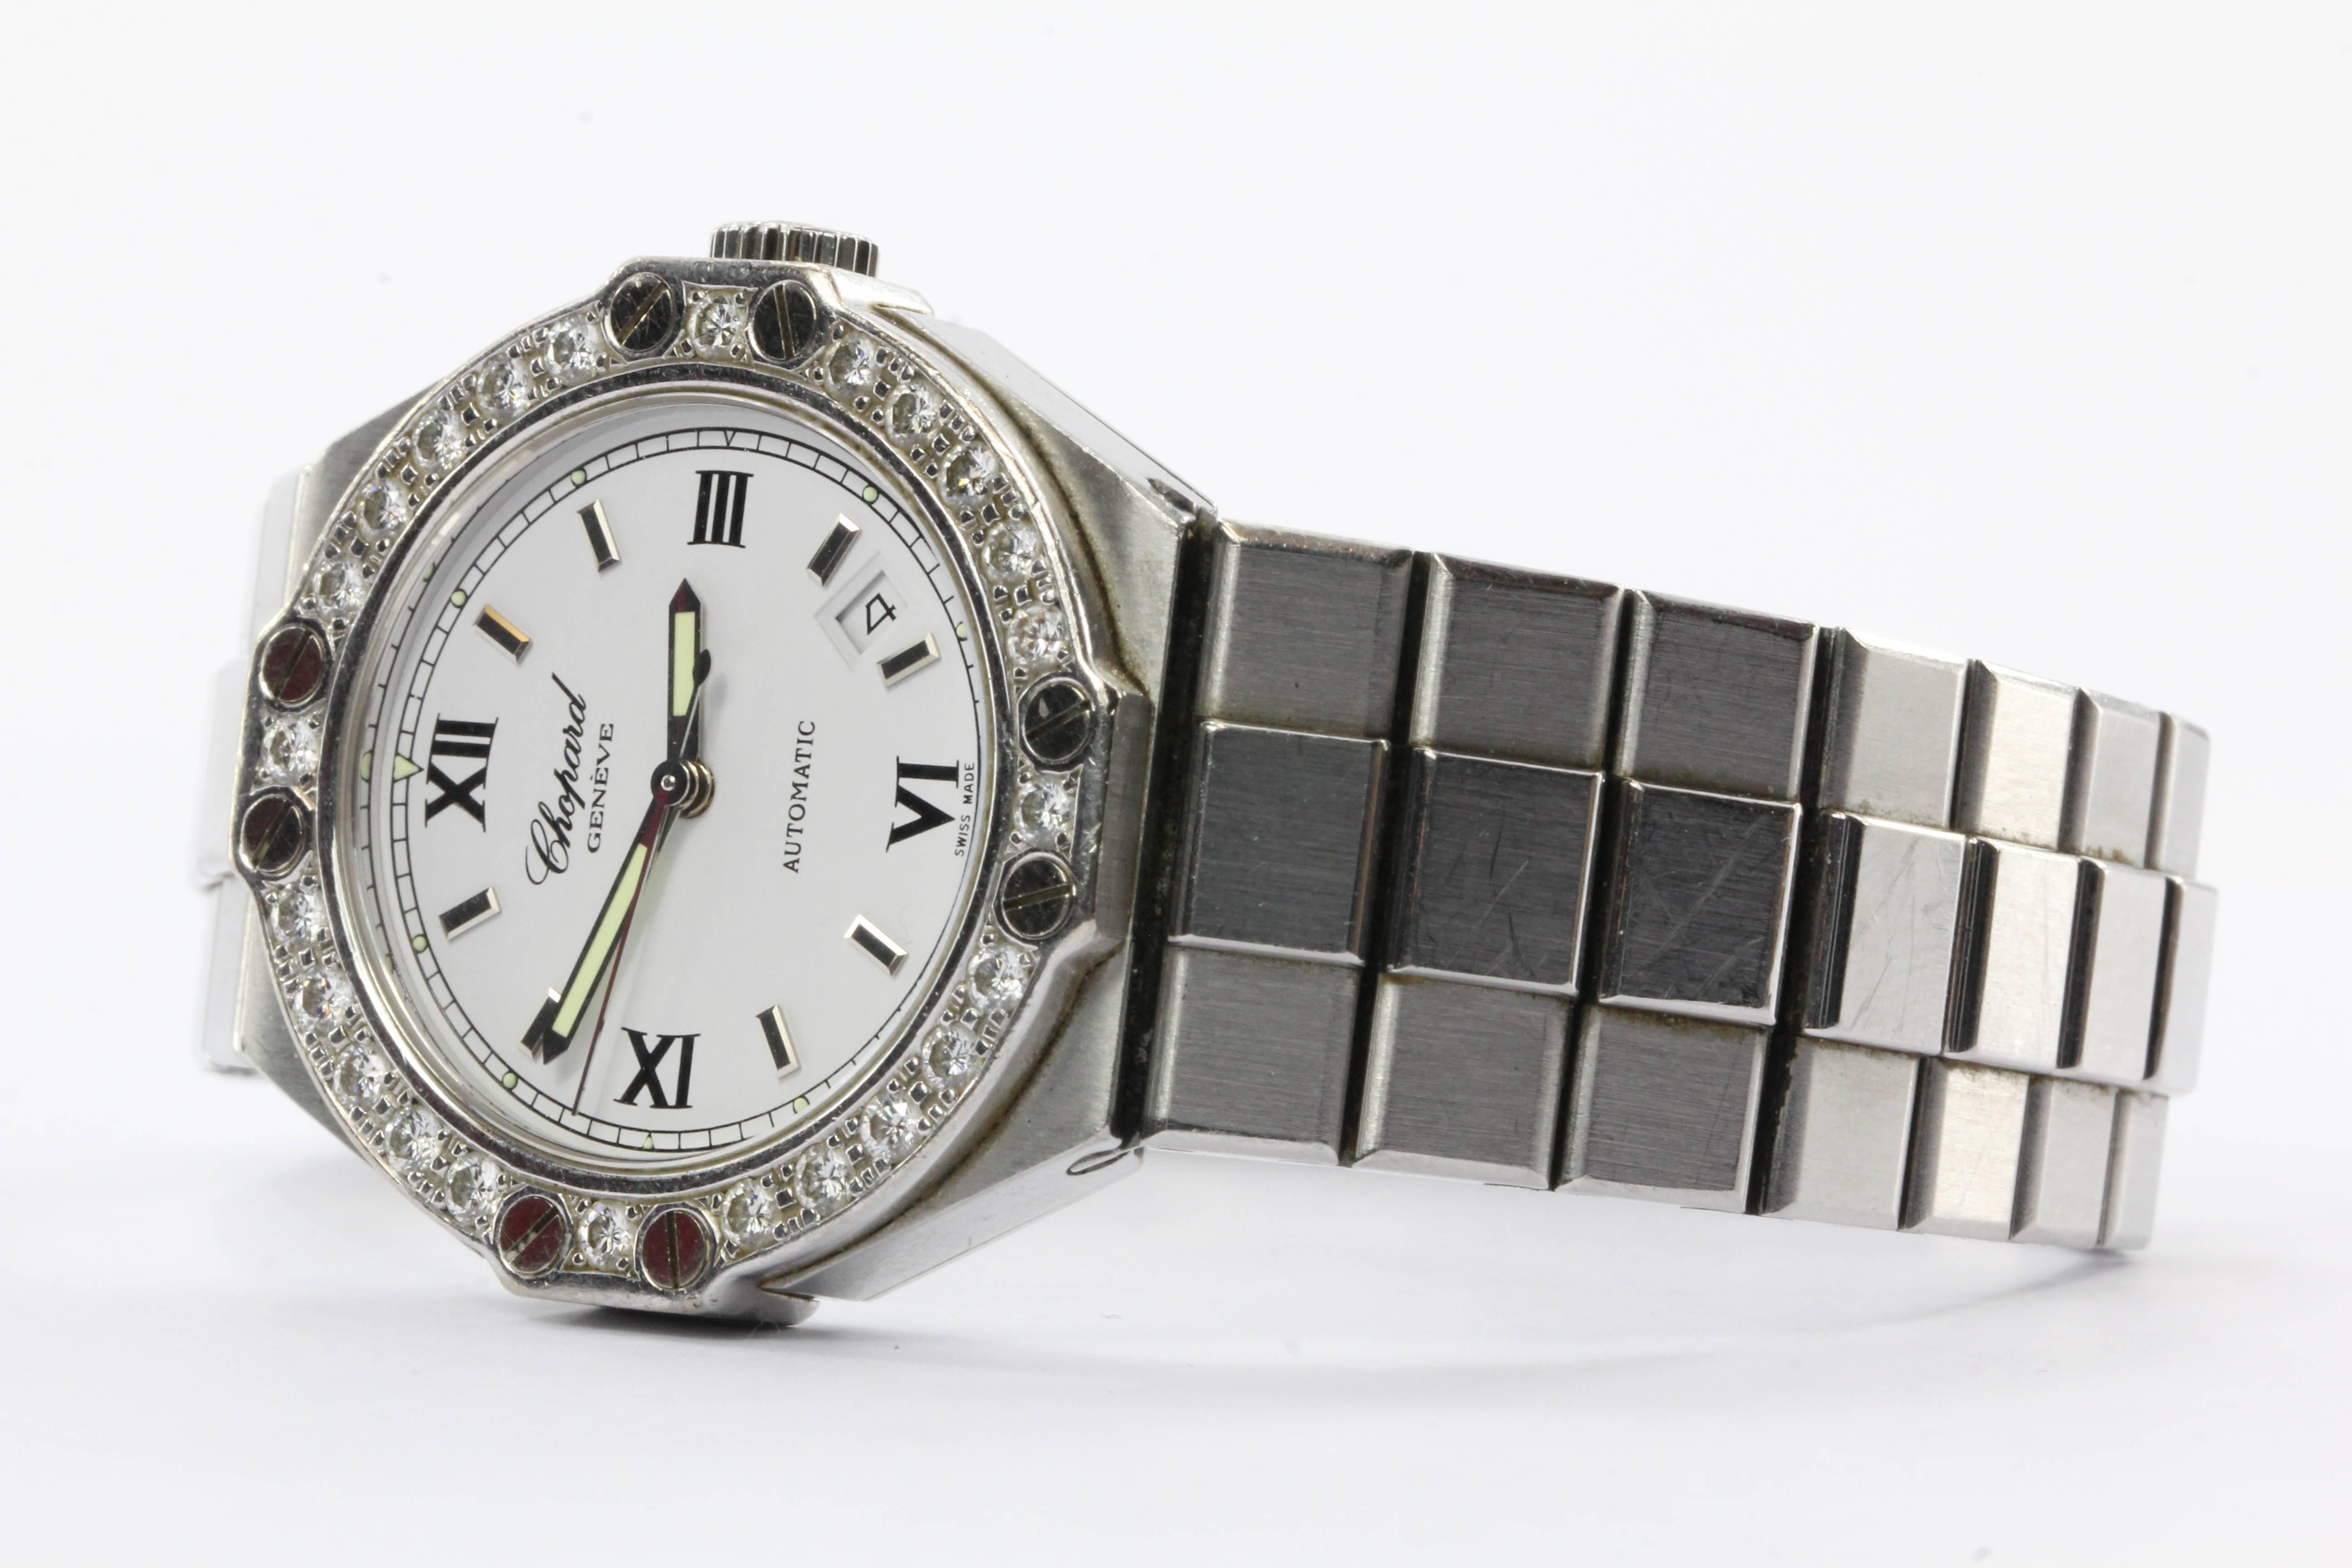 Chopard St. Moritz Diamond Bezel Steel Automatic Swiss Ladies Watch. The watch is in great used estate condition and ready to wear. It is running great and keepinless teeing time. The watch does exhibit signs of use. It does not come with its box or